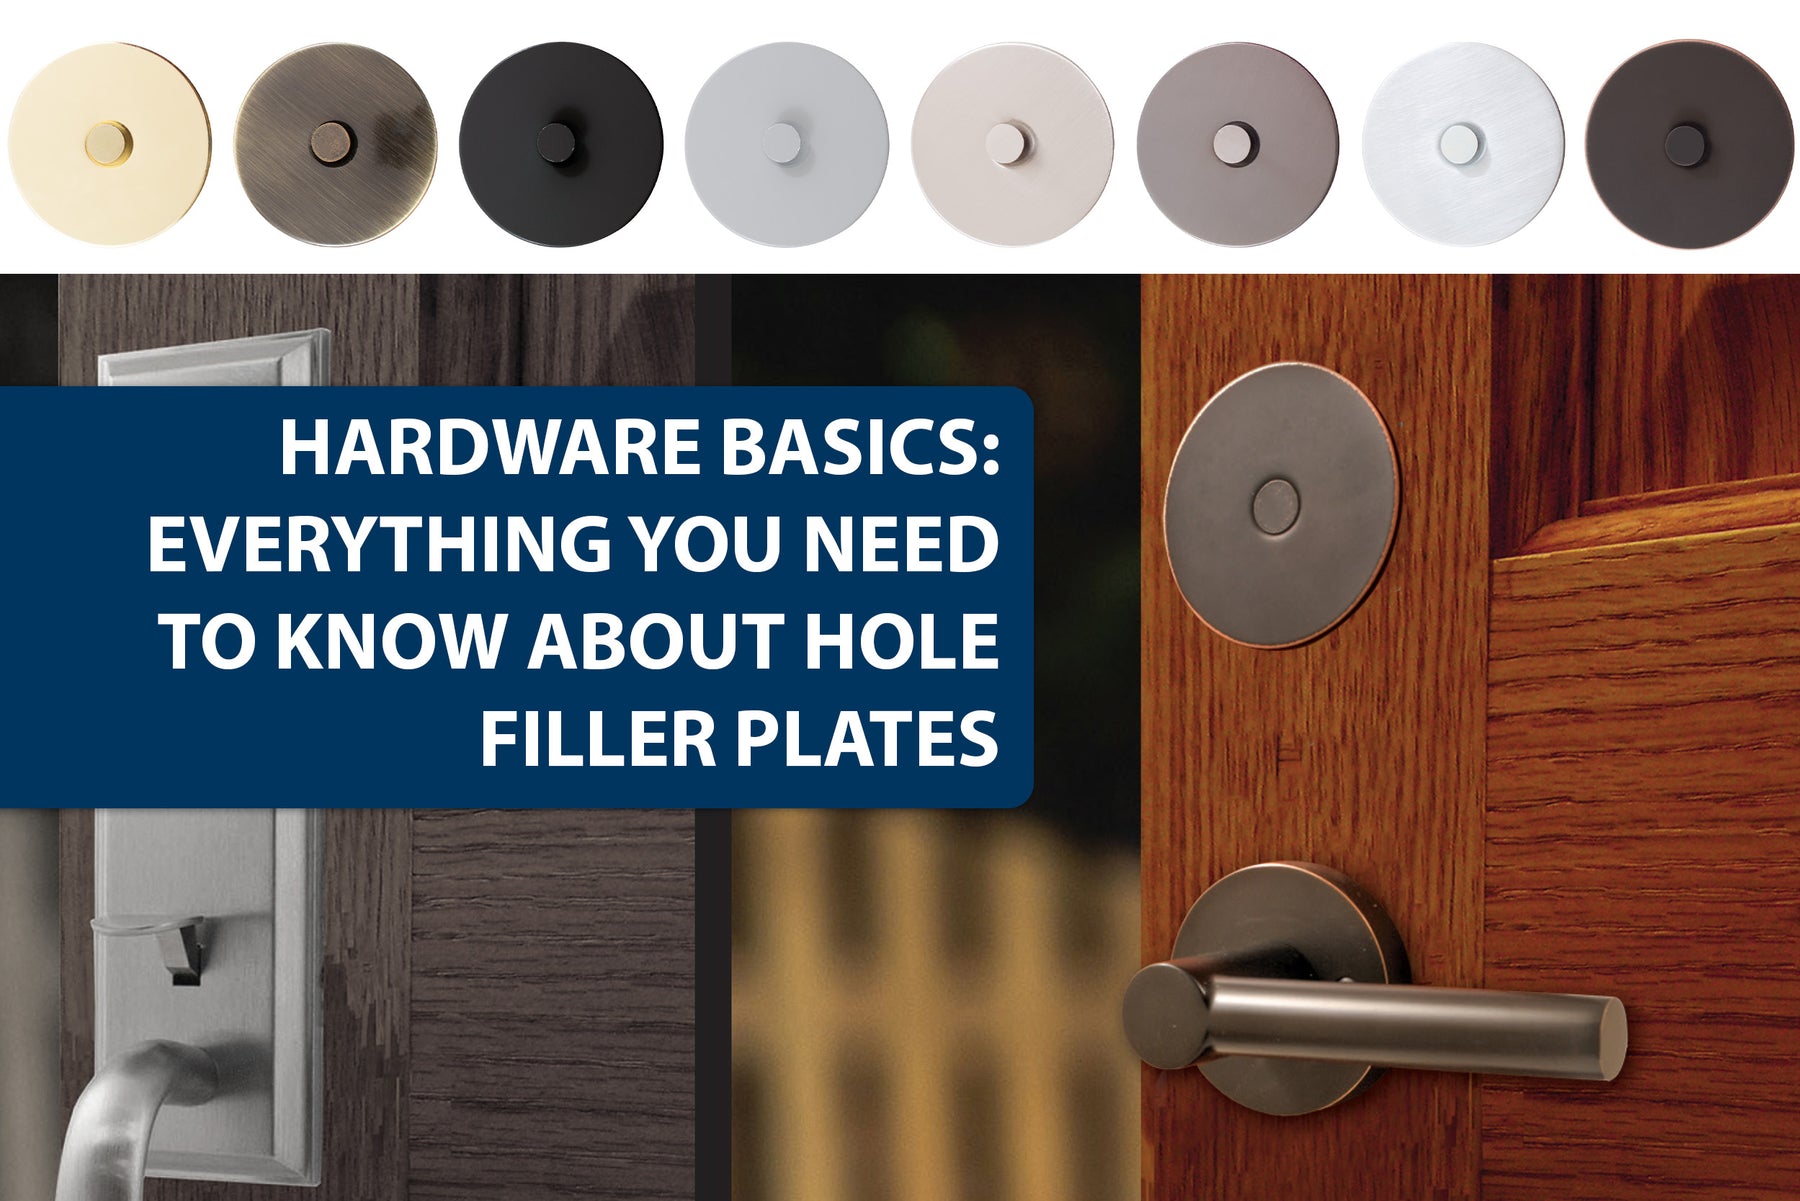 Hardware Basics: Everything You Need to Know About Hole Filler Plates